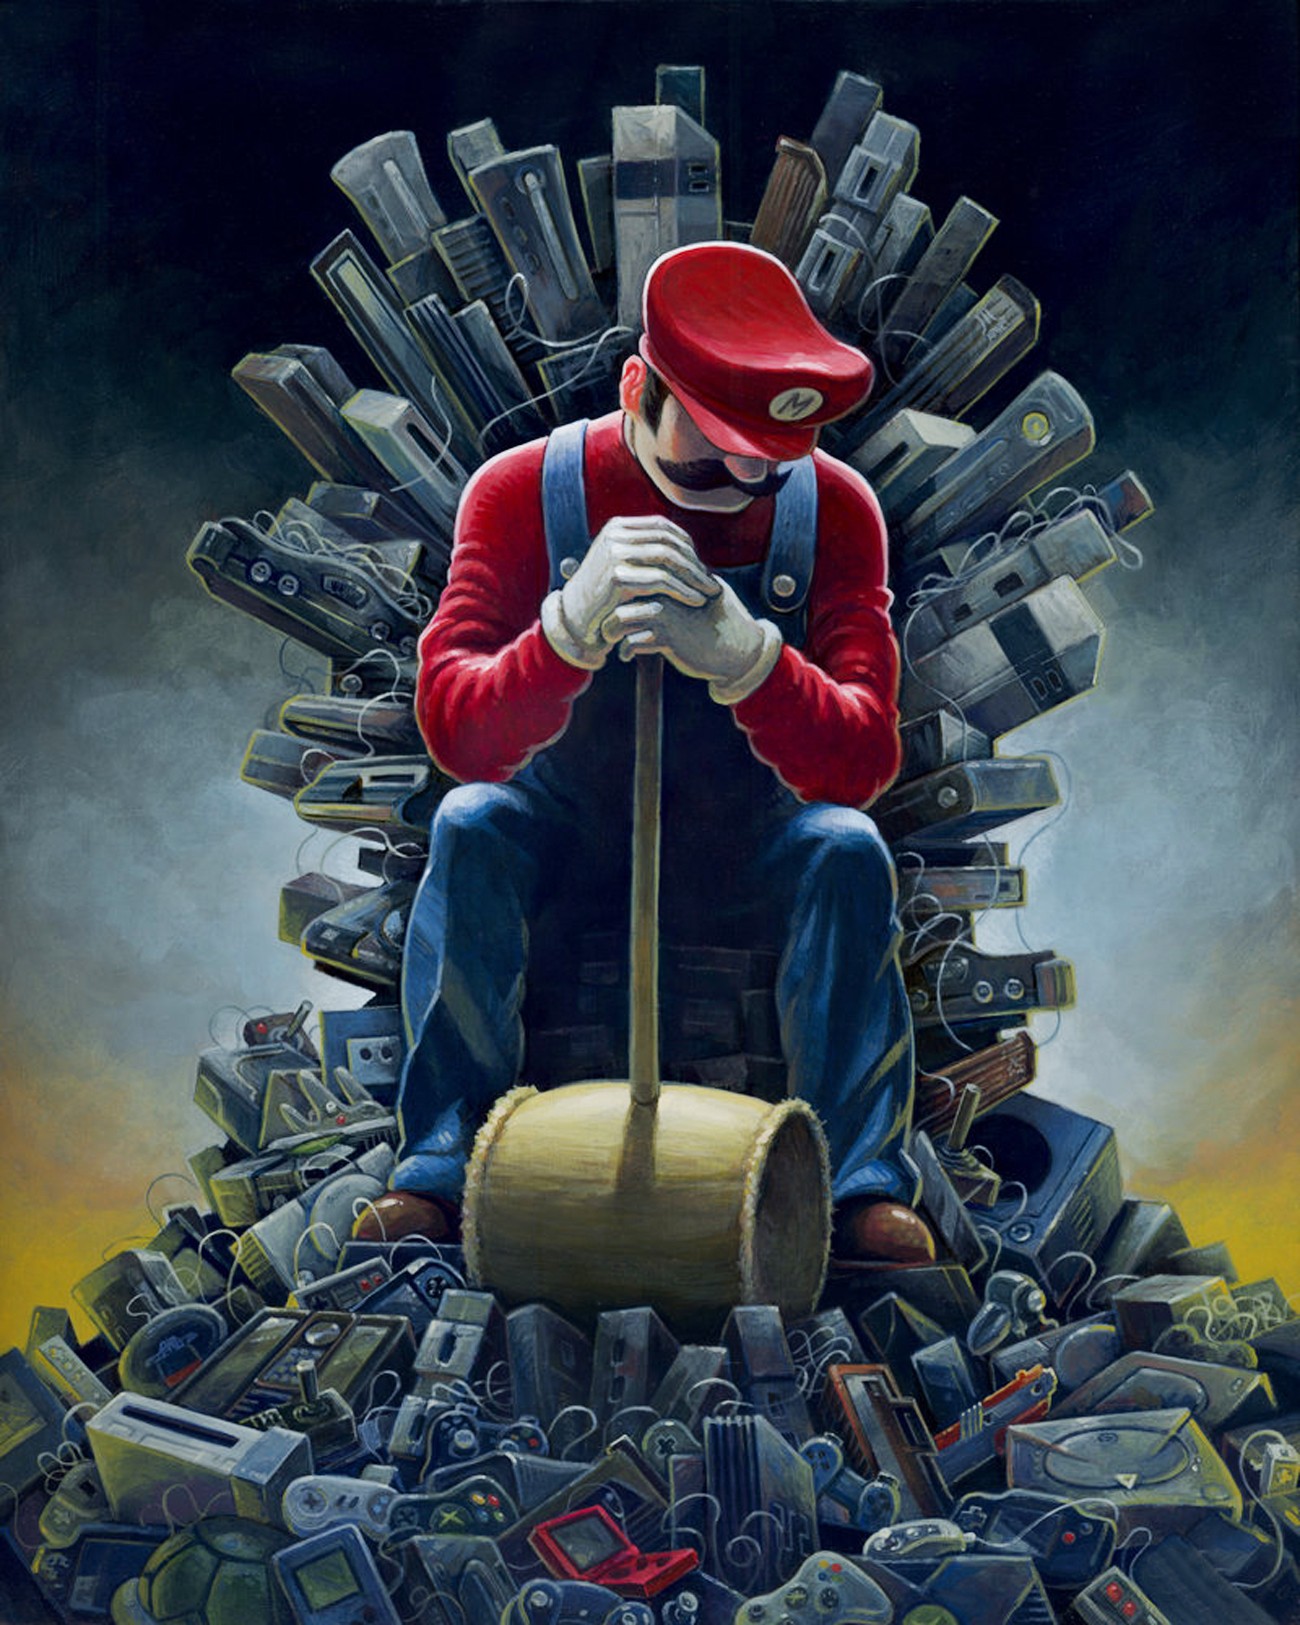 Super Mario, Game Of Thrones, Crossover, Iron Throne, Hammer Wallpapers